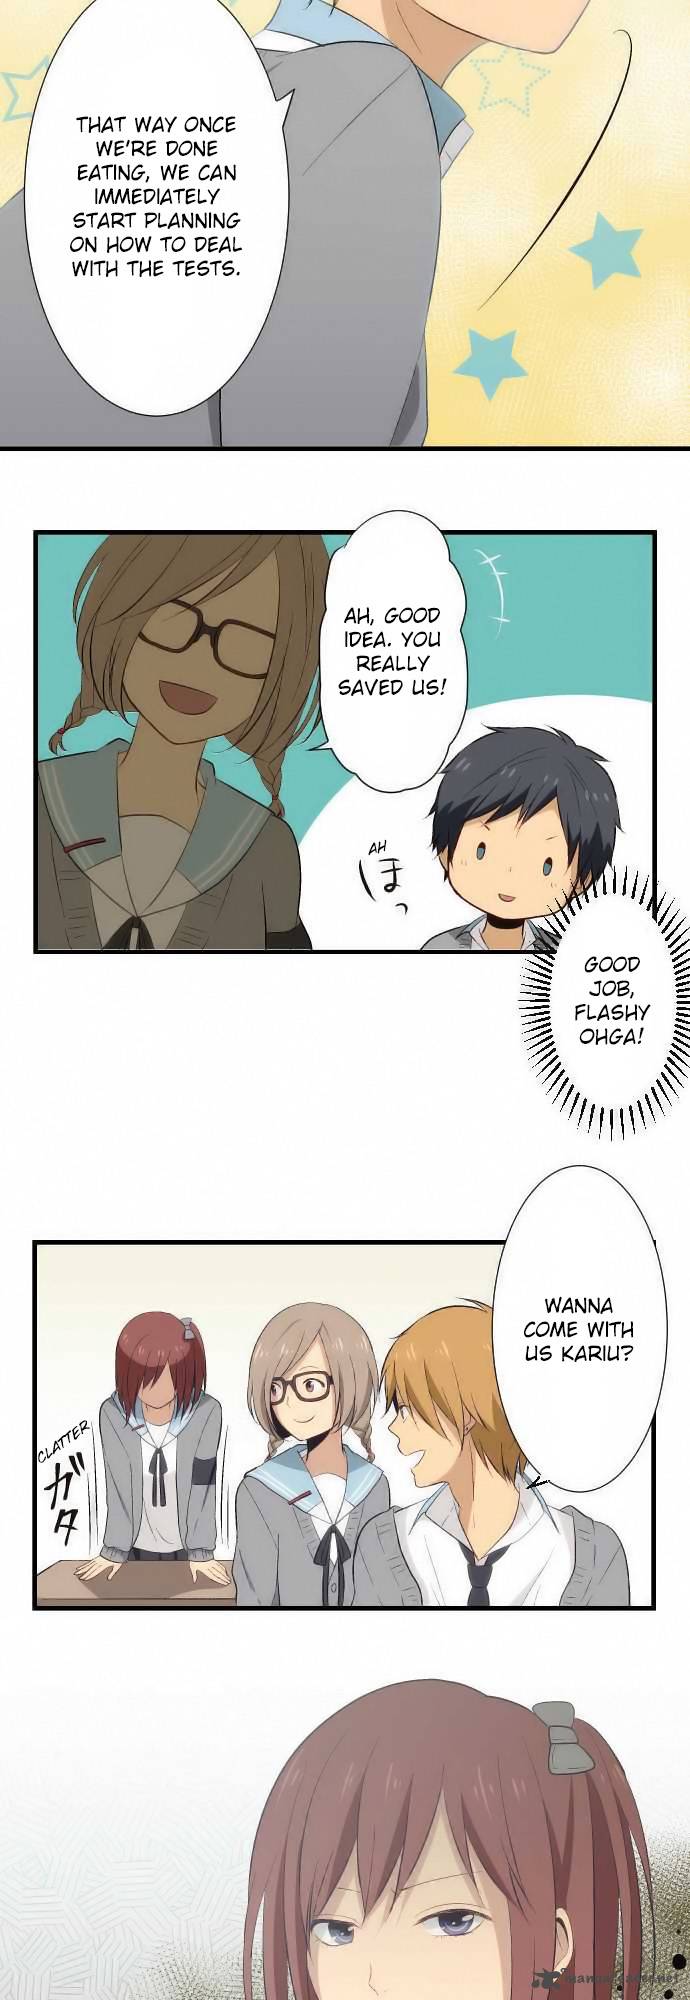 Relife 22 5